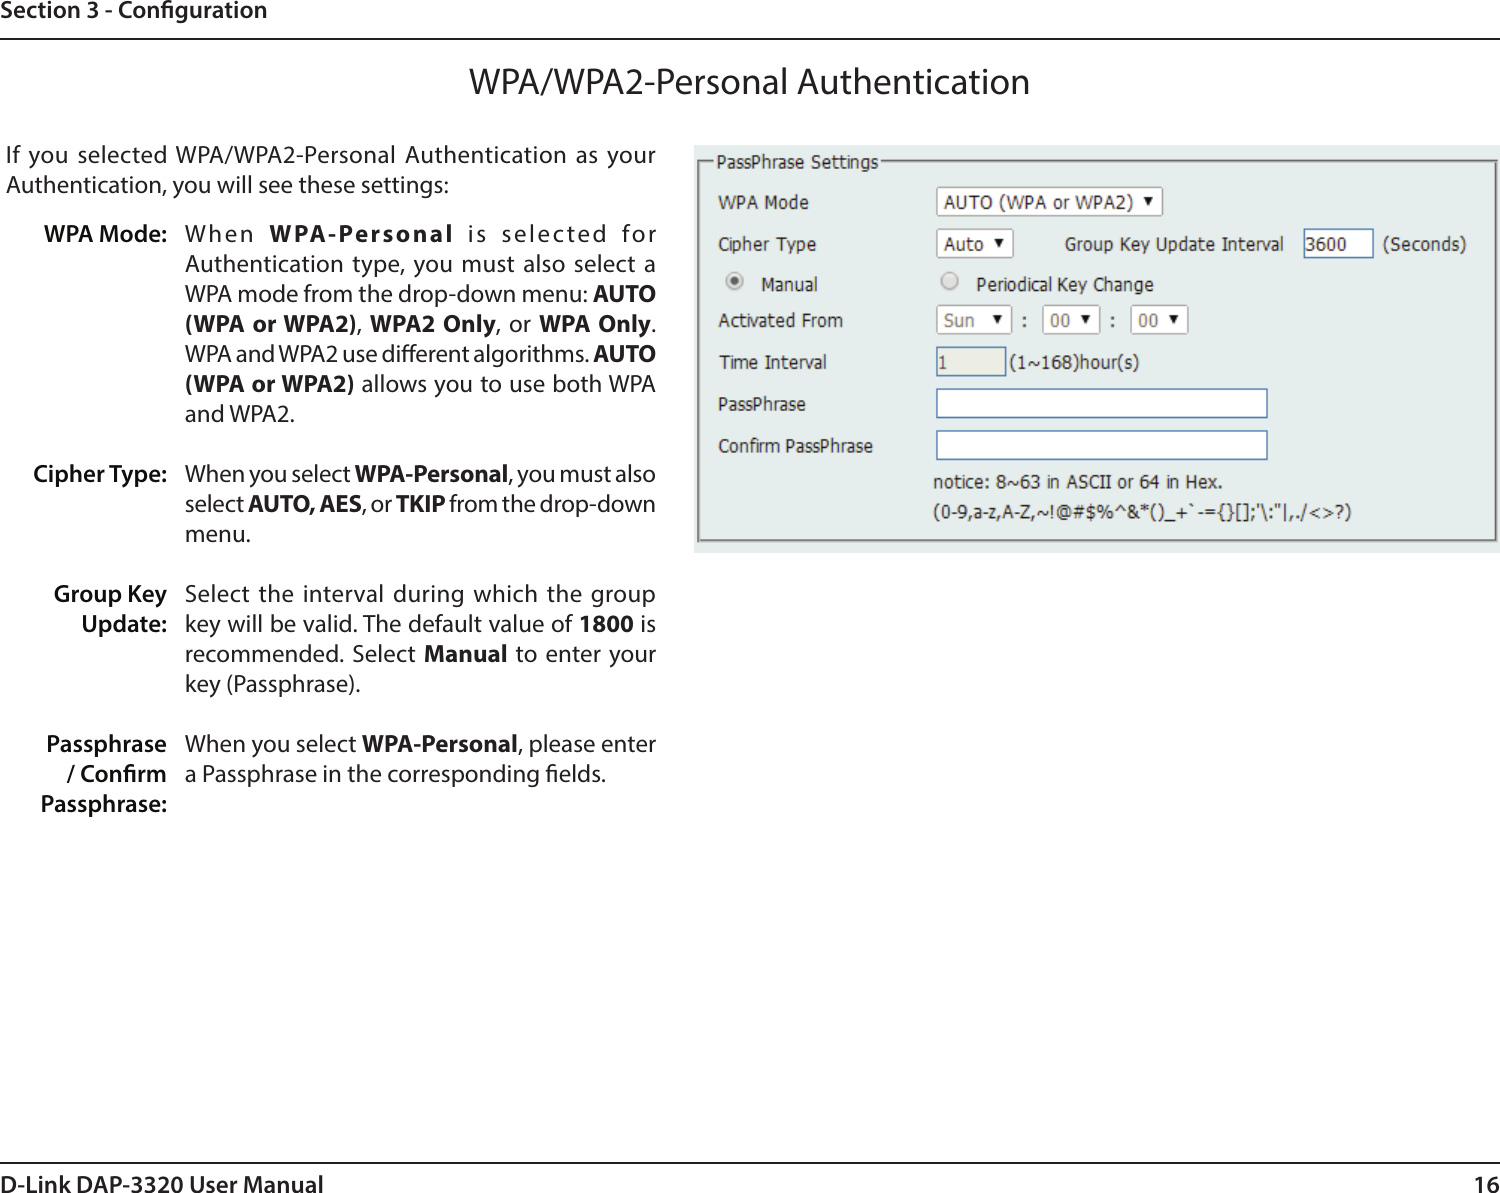 16D-Link DAP-3320 User ManualSection 3 - CongurationWPA/WPA2-Personal AuthenticationWhen  WPA-Personal is selected for Authentication type, you must also select a WPA mode from the drop-down menu: AUTO (WPA or WPA2), WPA2 Only, or WPA Only. WPA and WPA2 use dierent algorithms. AUTO (WPA or WPA2) allows you to use both WPA and WPA2.When you select WPA-Personal, you must also select AUTO, AES, or TKIP from the drop-down menu.Select the interval during which the group key will be valid. The default value of 1800 is recommended. Select Manual to enter your key (Passphrase). When you select WPA-Personal, please enter a Passphrase in the corresponding elds.WPA Mode: Cipher Type:Group Key Update:Passphrase / Conrm Passphrase:If you selected WPA/WPA2-Personal Authentication as your Authentication, you will see these settings: